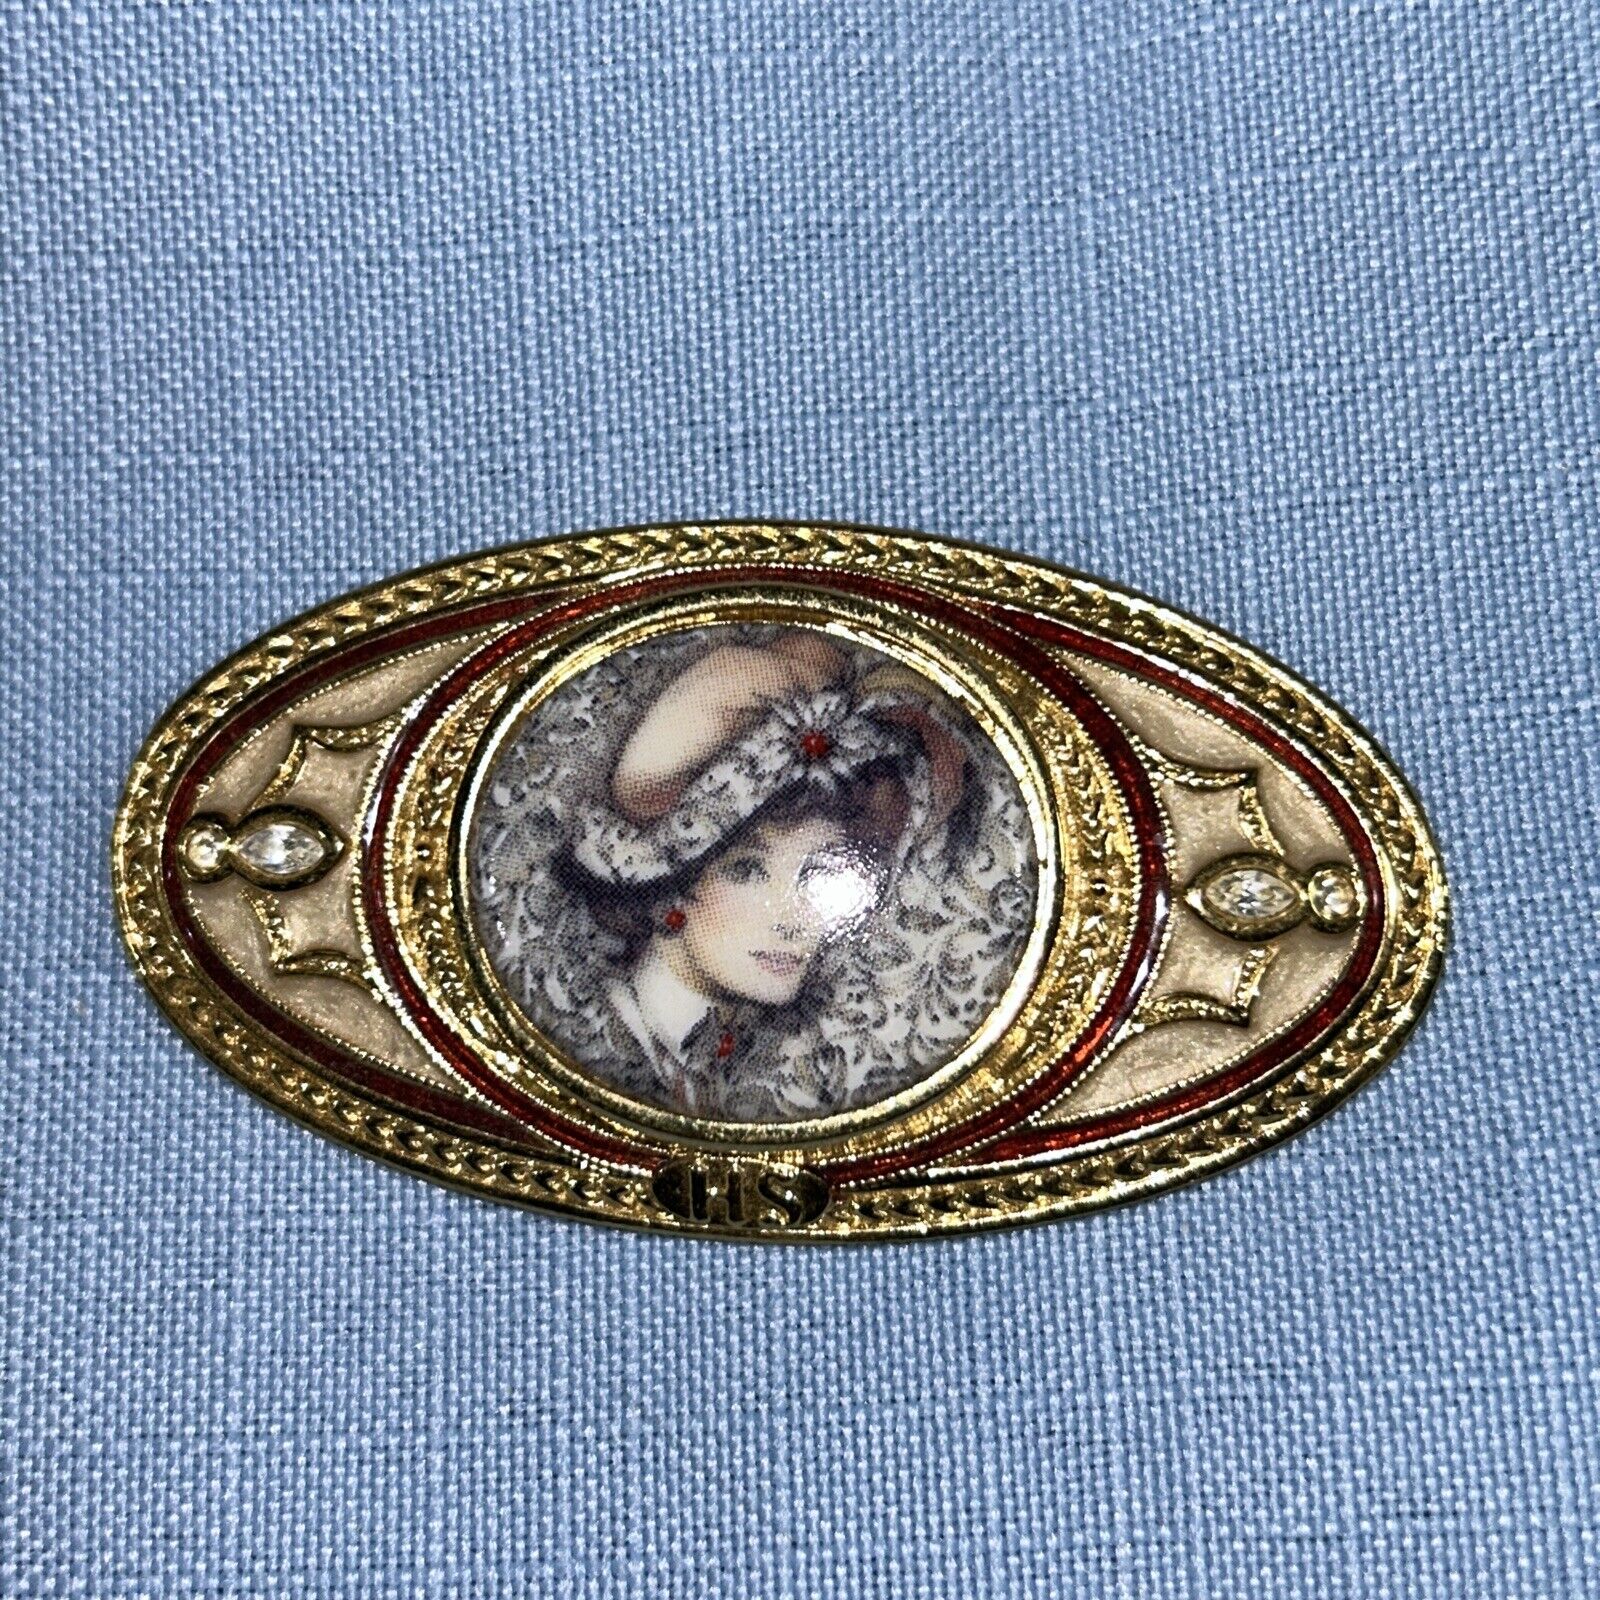 AVON 97/98 President's Club Recognition Award Brooch Oval Pin Lady's Face